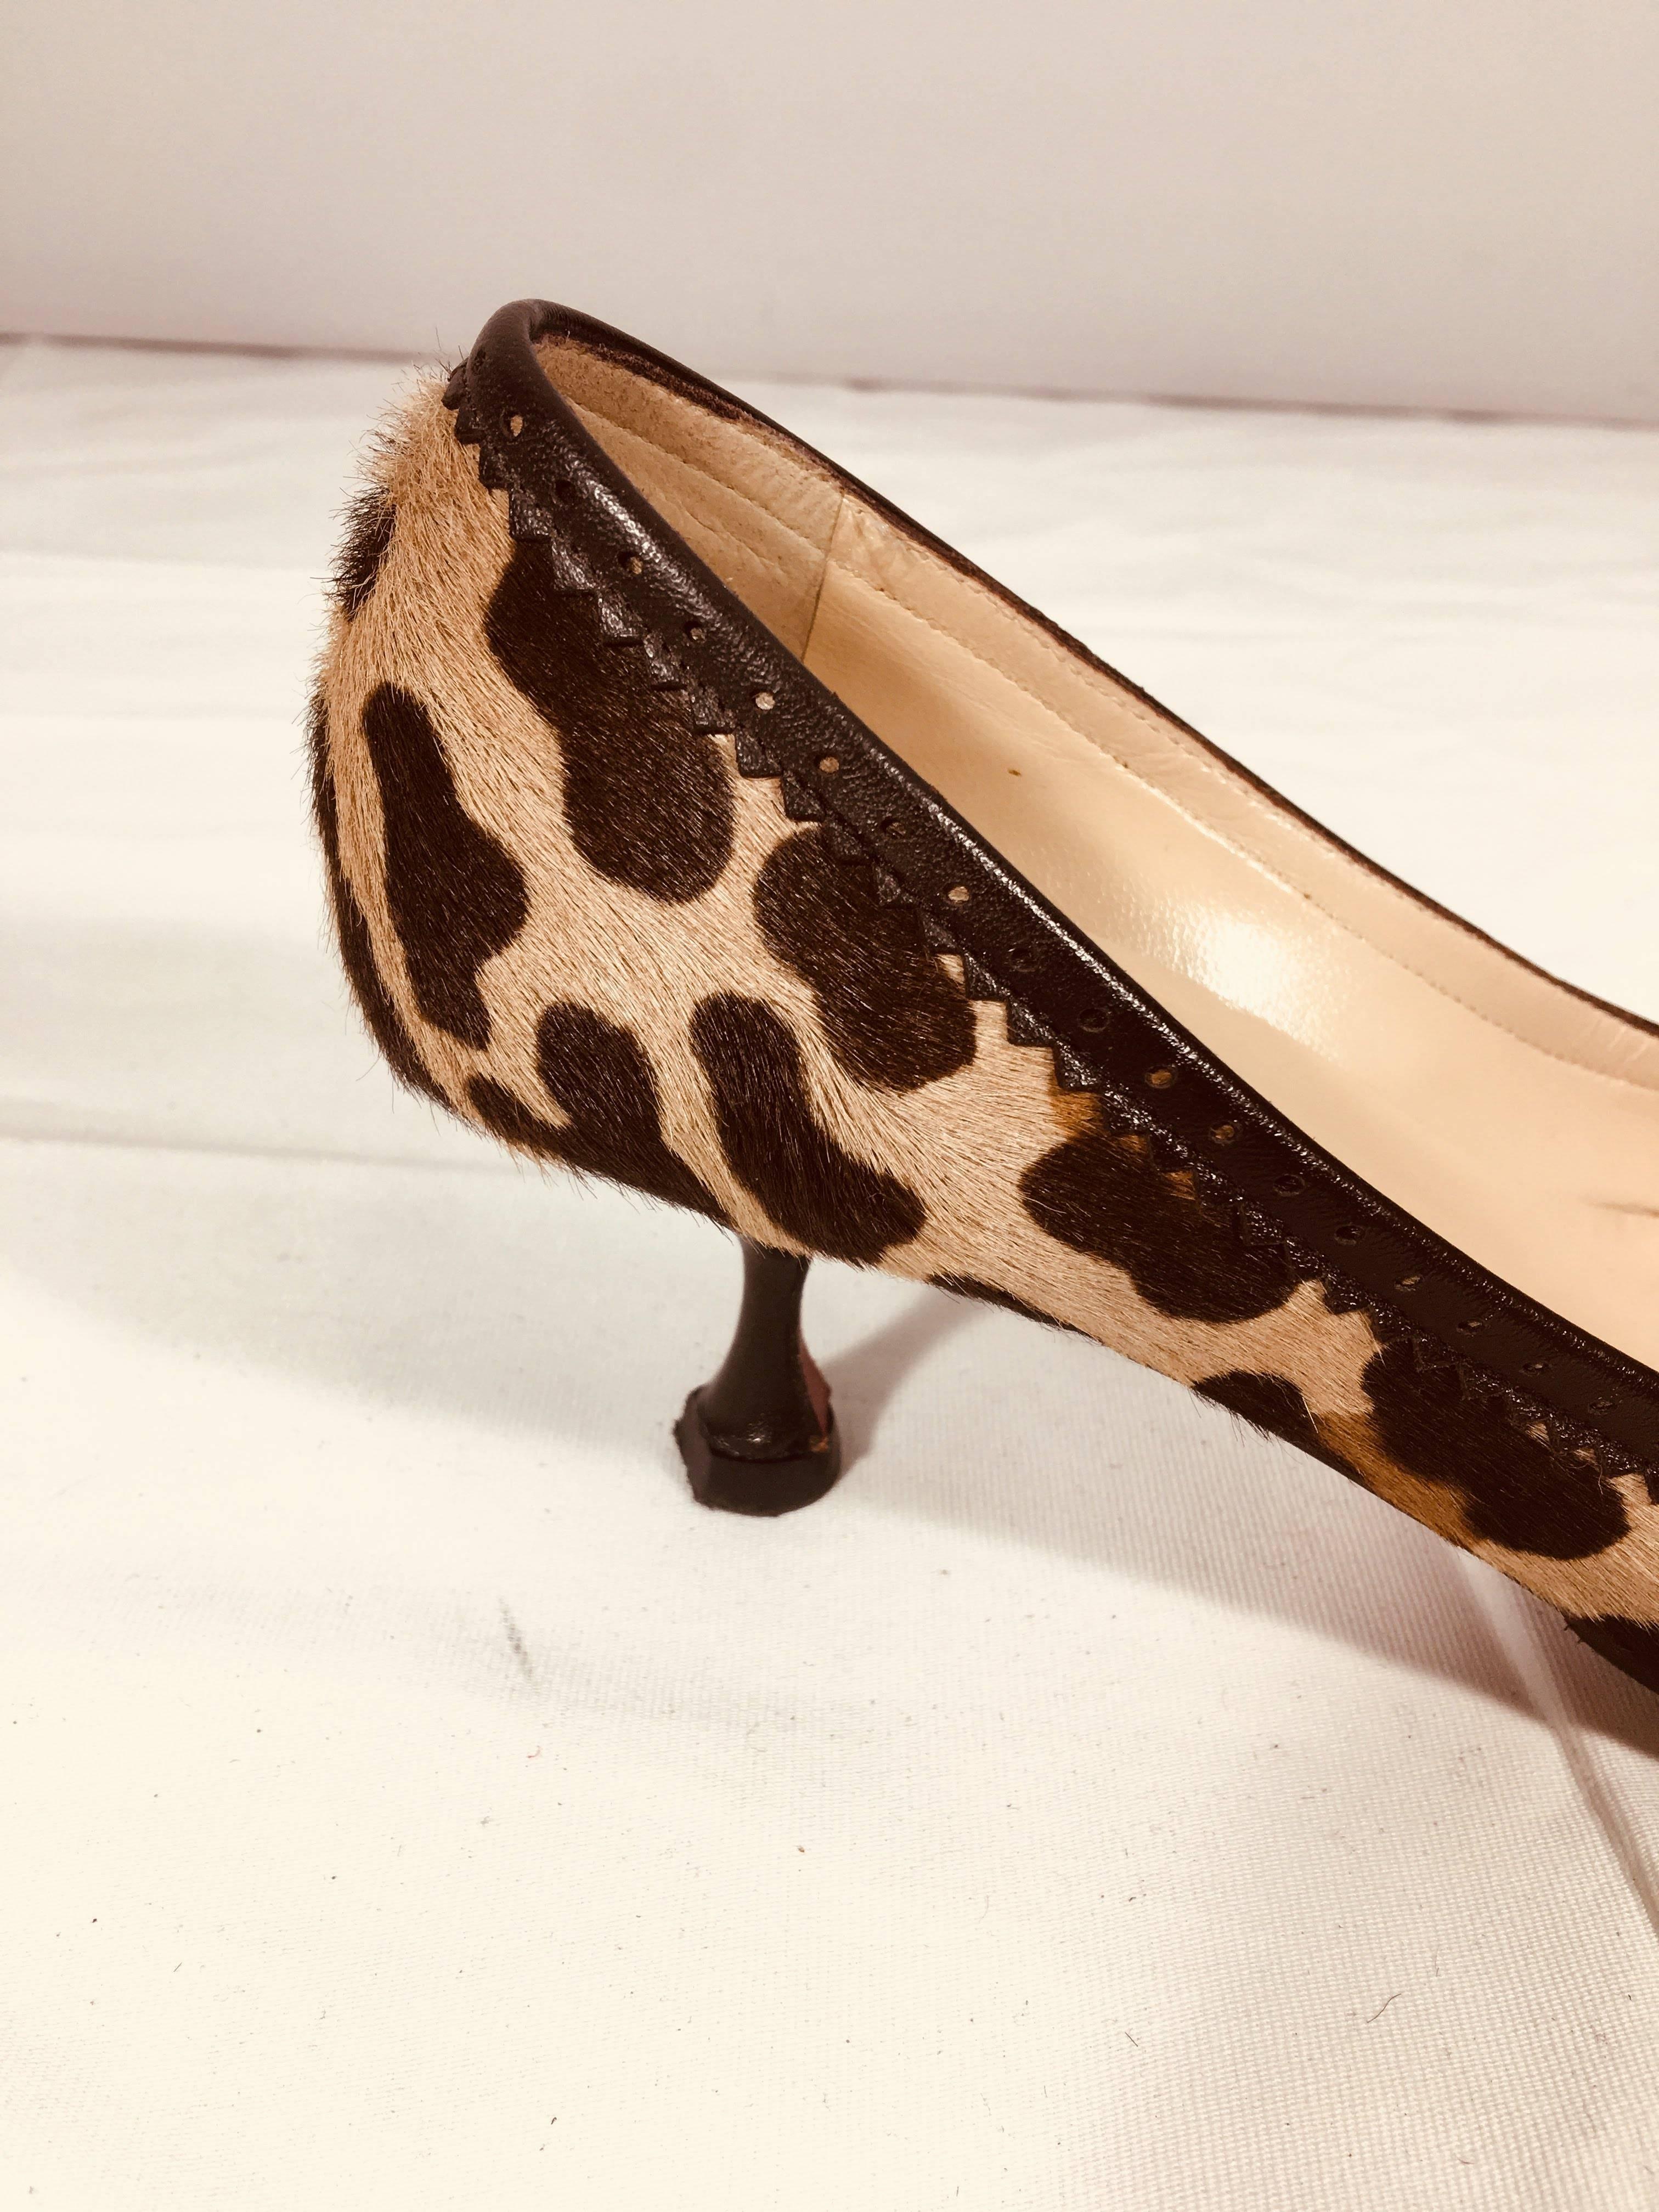 Christian Louboutin Leopard Print Kitten Heels with Round Toe, Leather Trim, and Tassel.